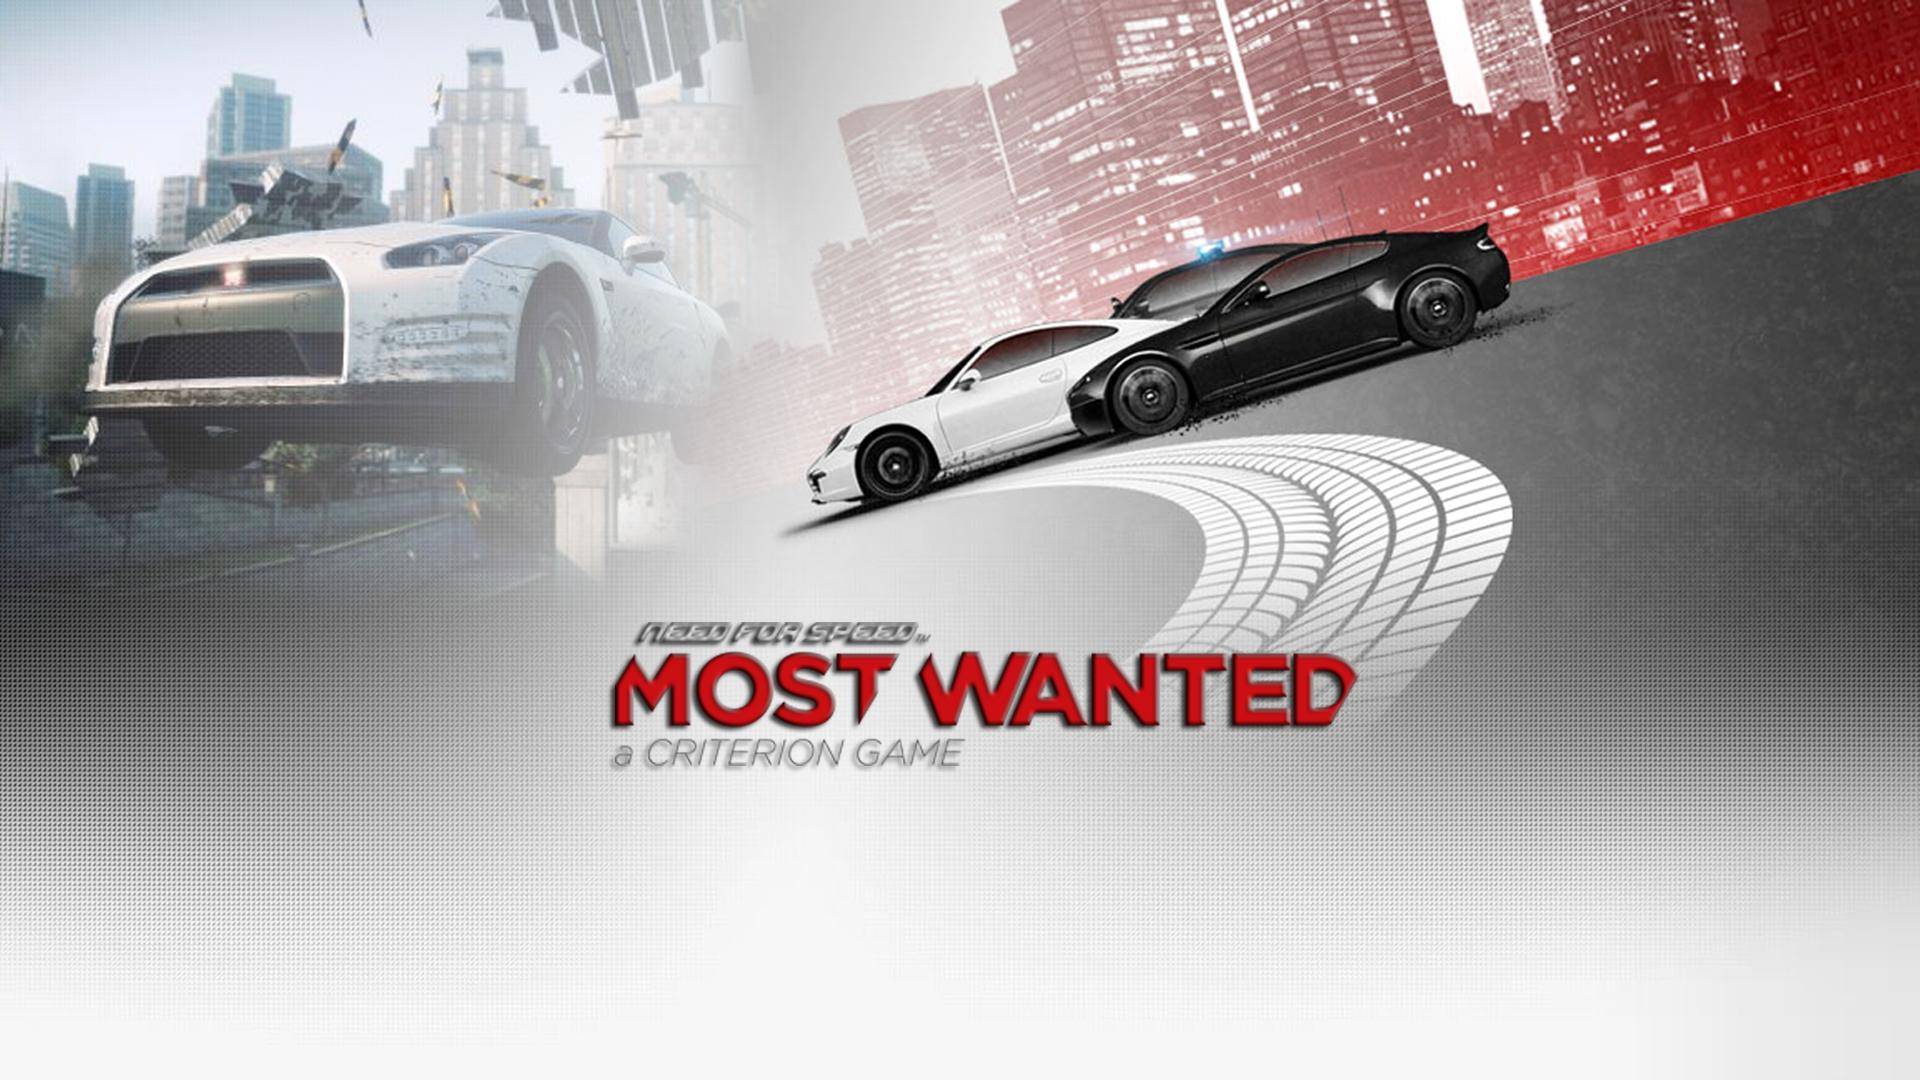 Need For Speed Most Wanted PS3